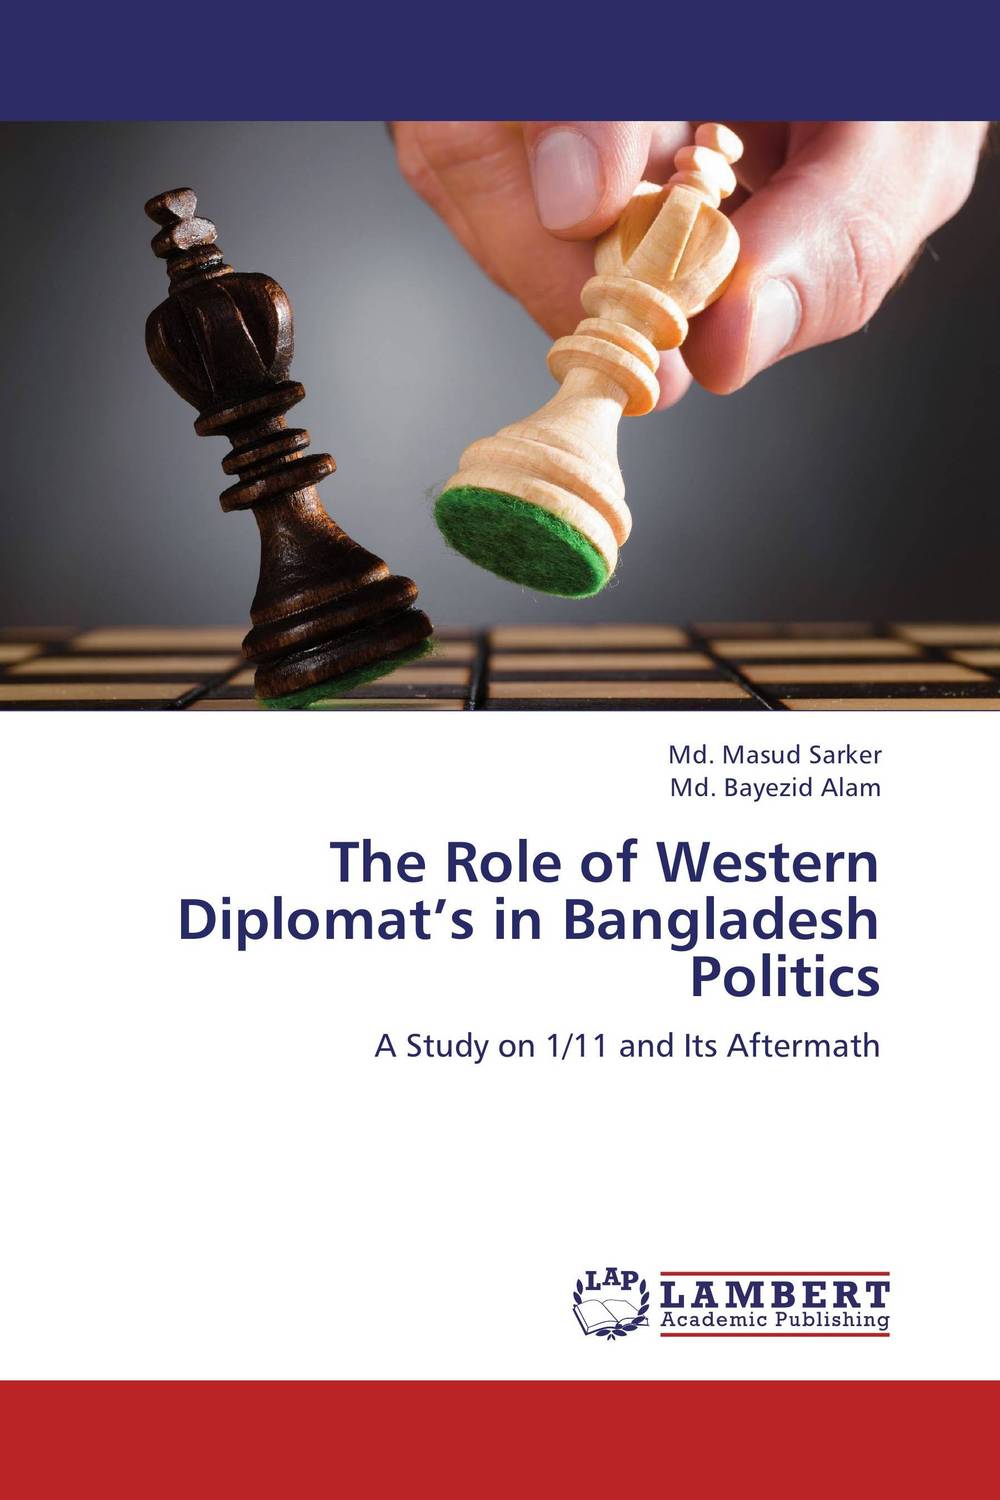 The Role of Western Diplomat’s in Bangladesh Politics